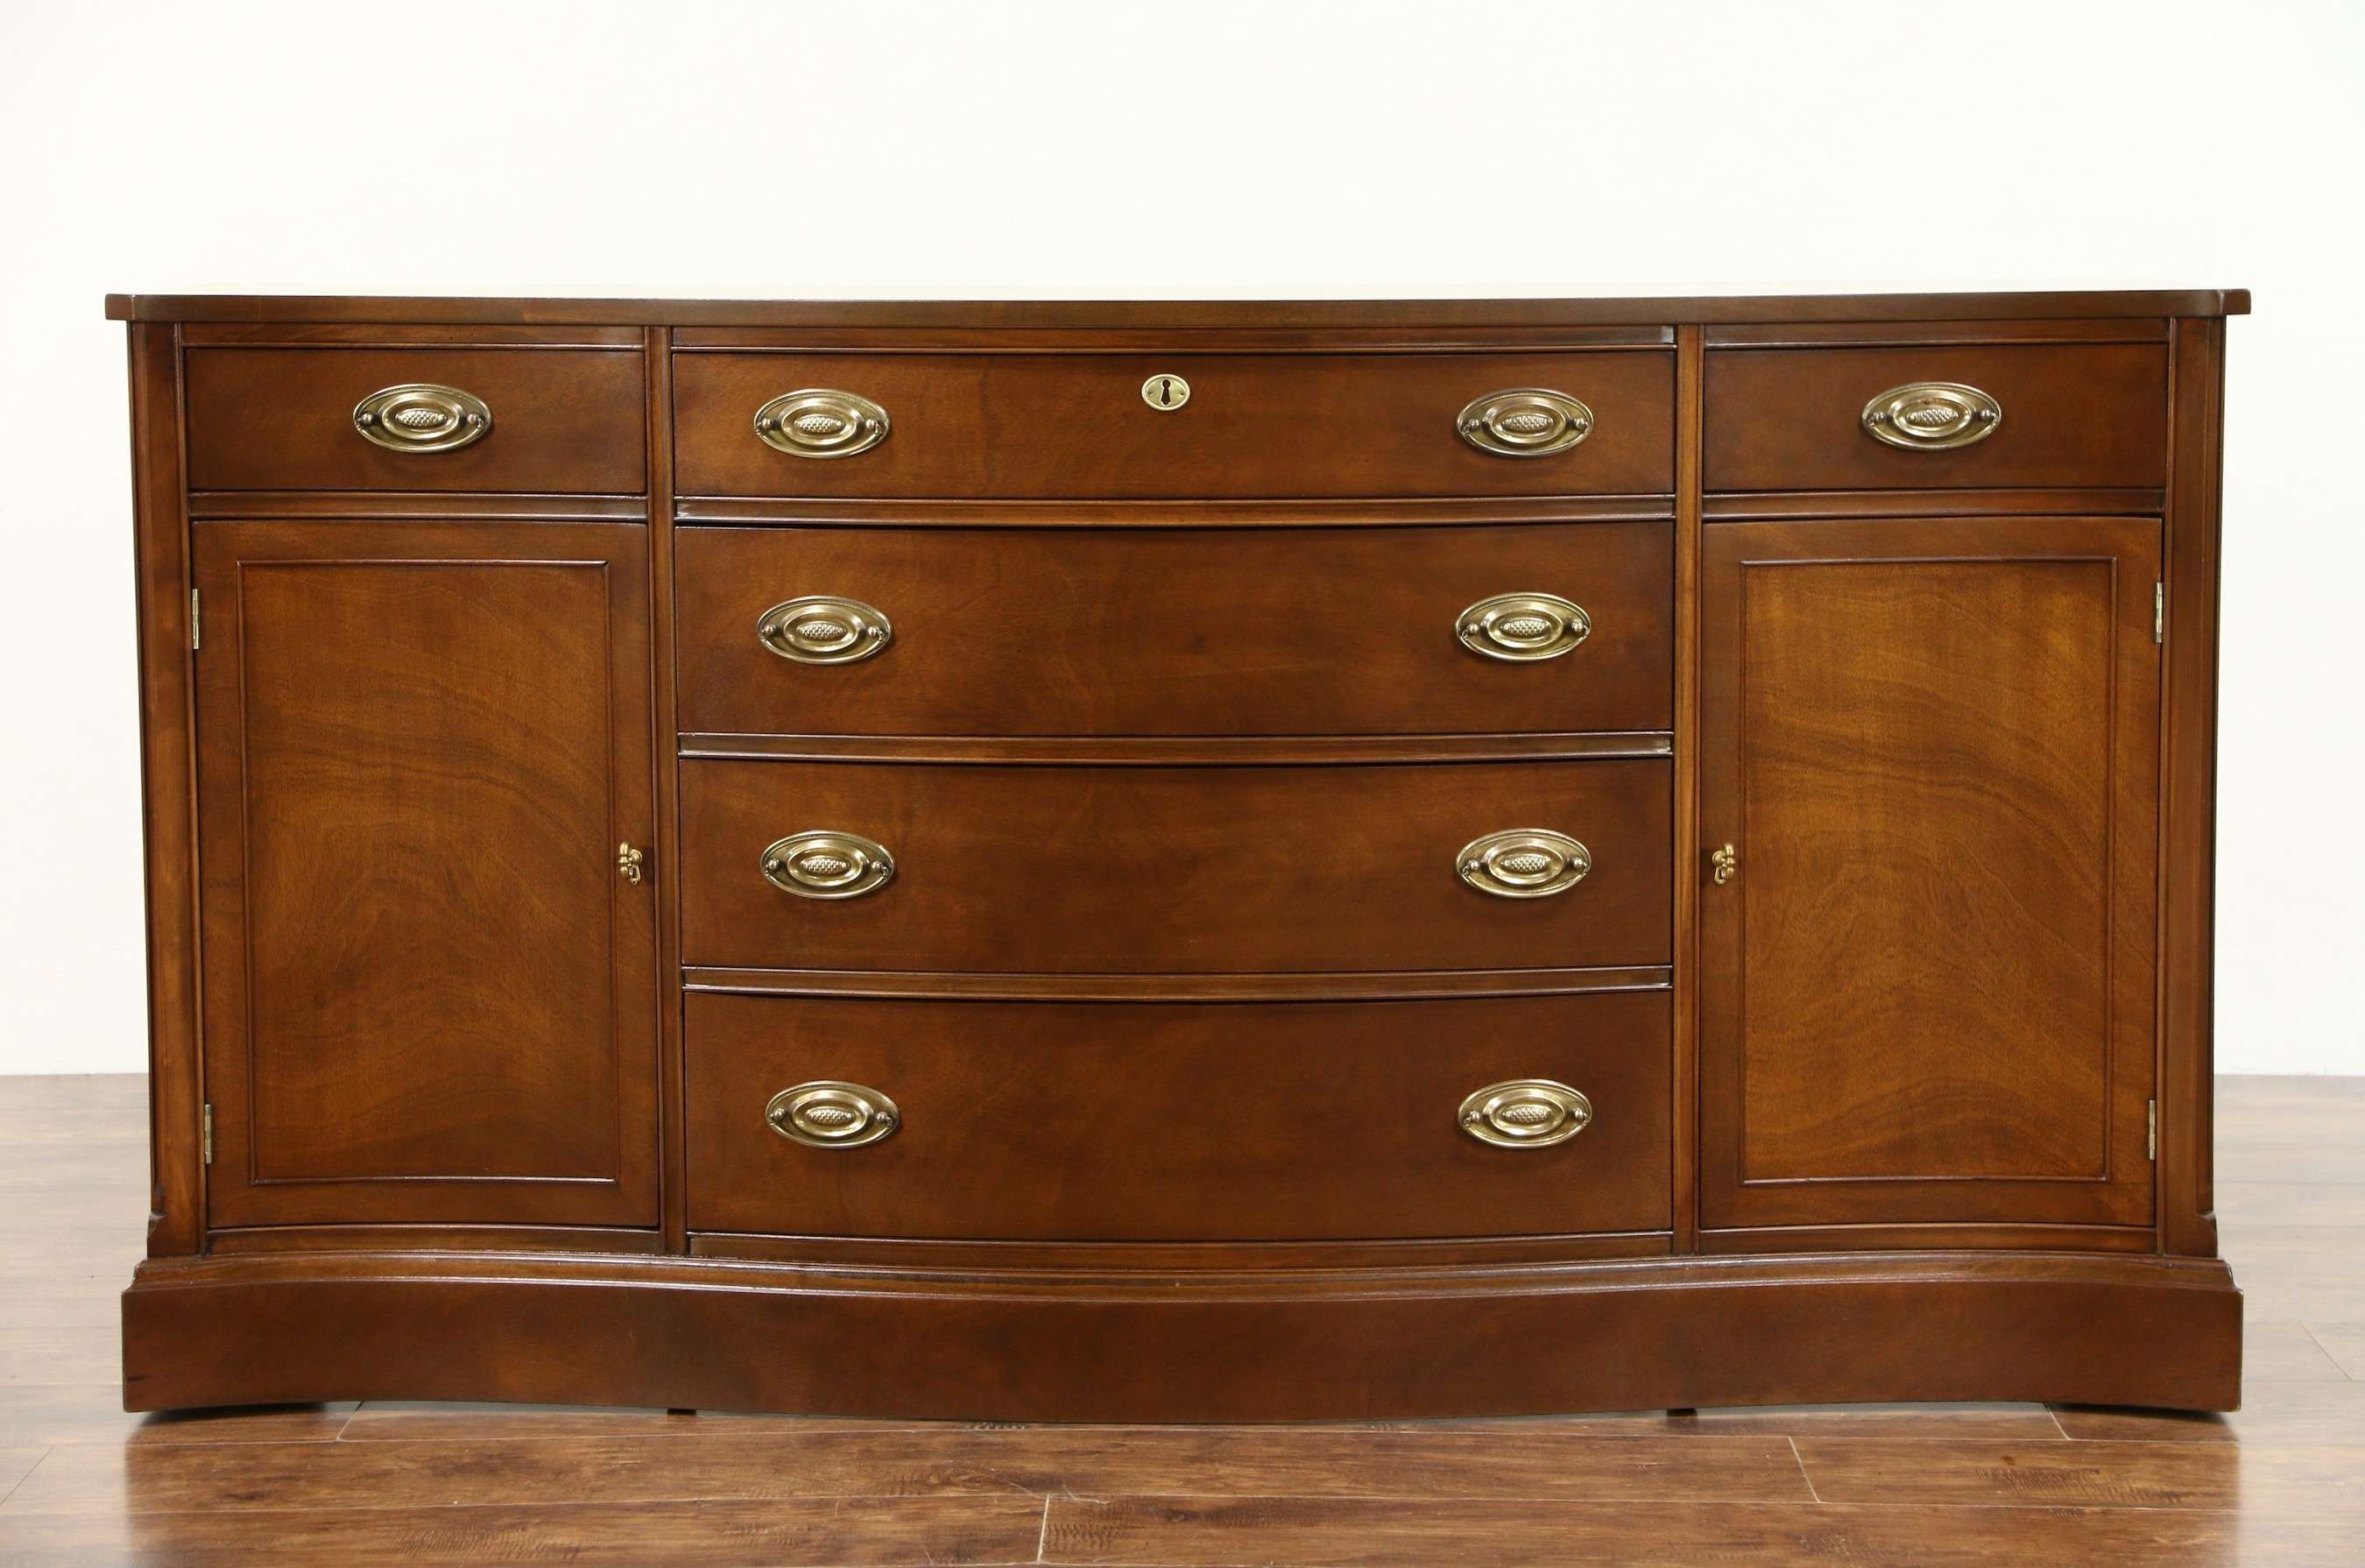 Sold – Traditional Vintage Mahogany Sideboard, Server Or Buffet Throughout Mahogany Sideboards (View 18 of 20)